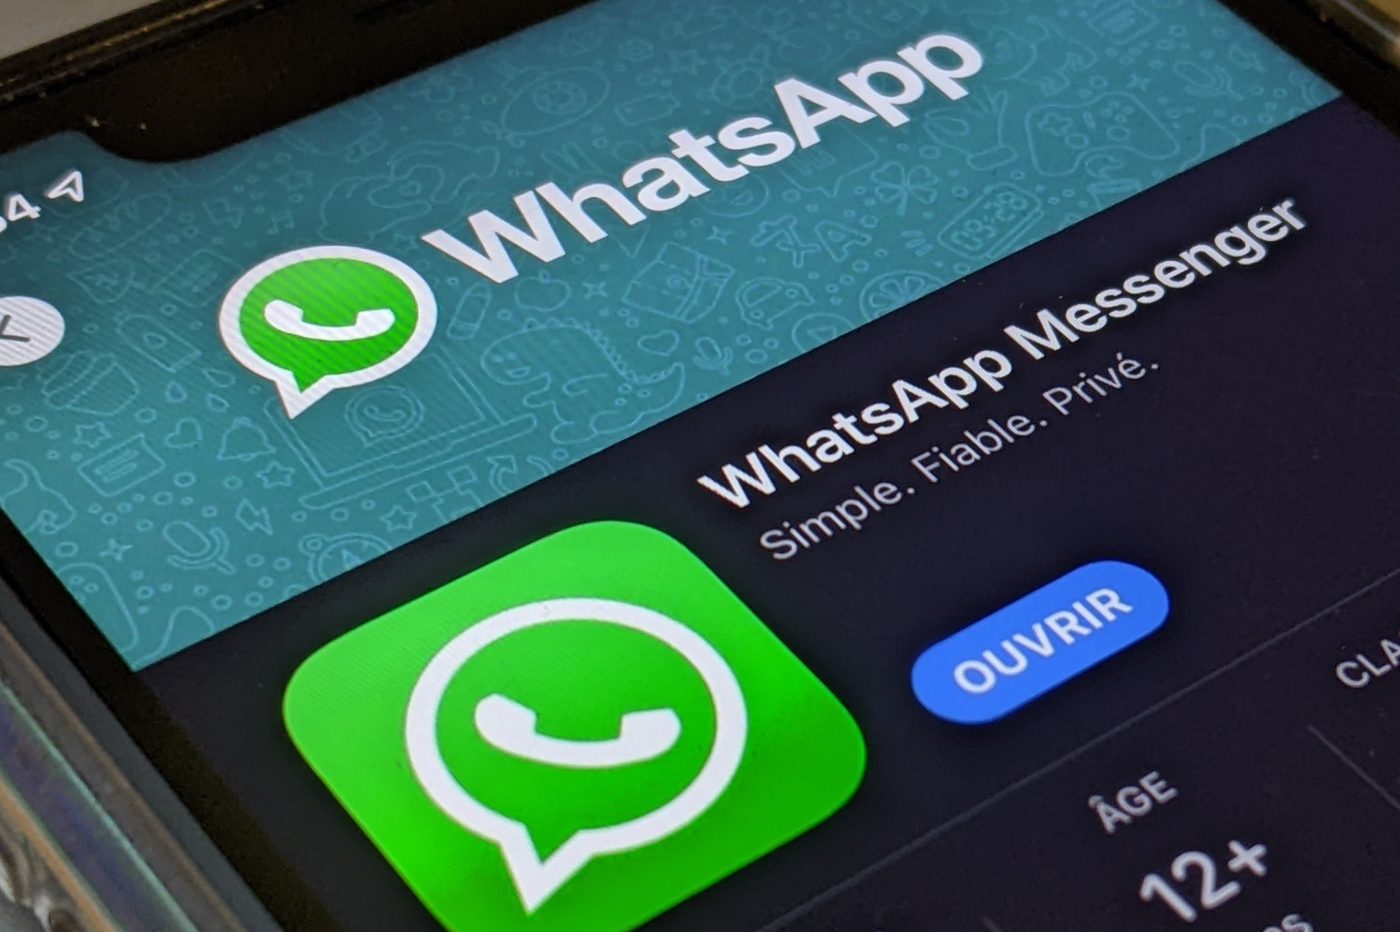 WhatsApp has finally found a simple solution to transfer your chat history